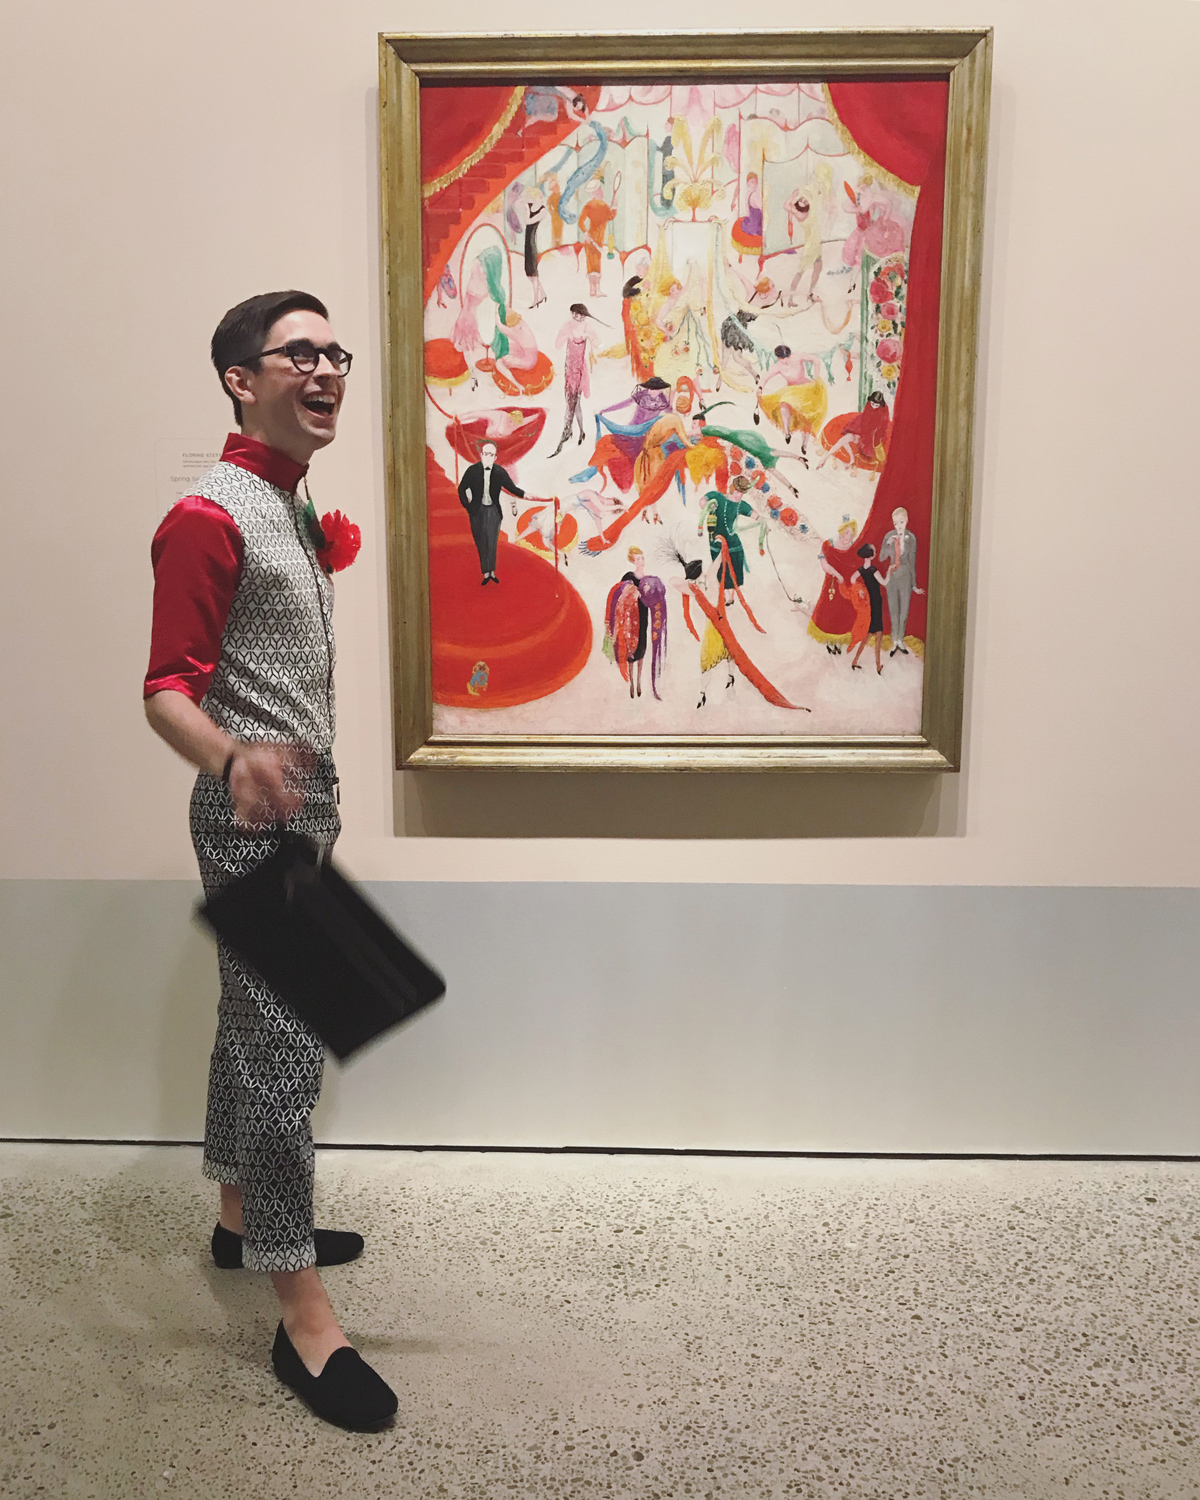 A graduate student smiling with a colourful painting in a gallery